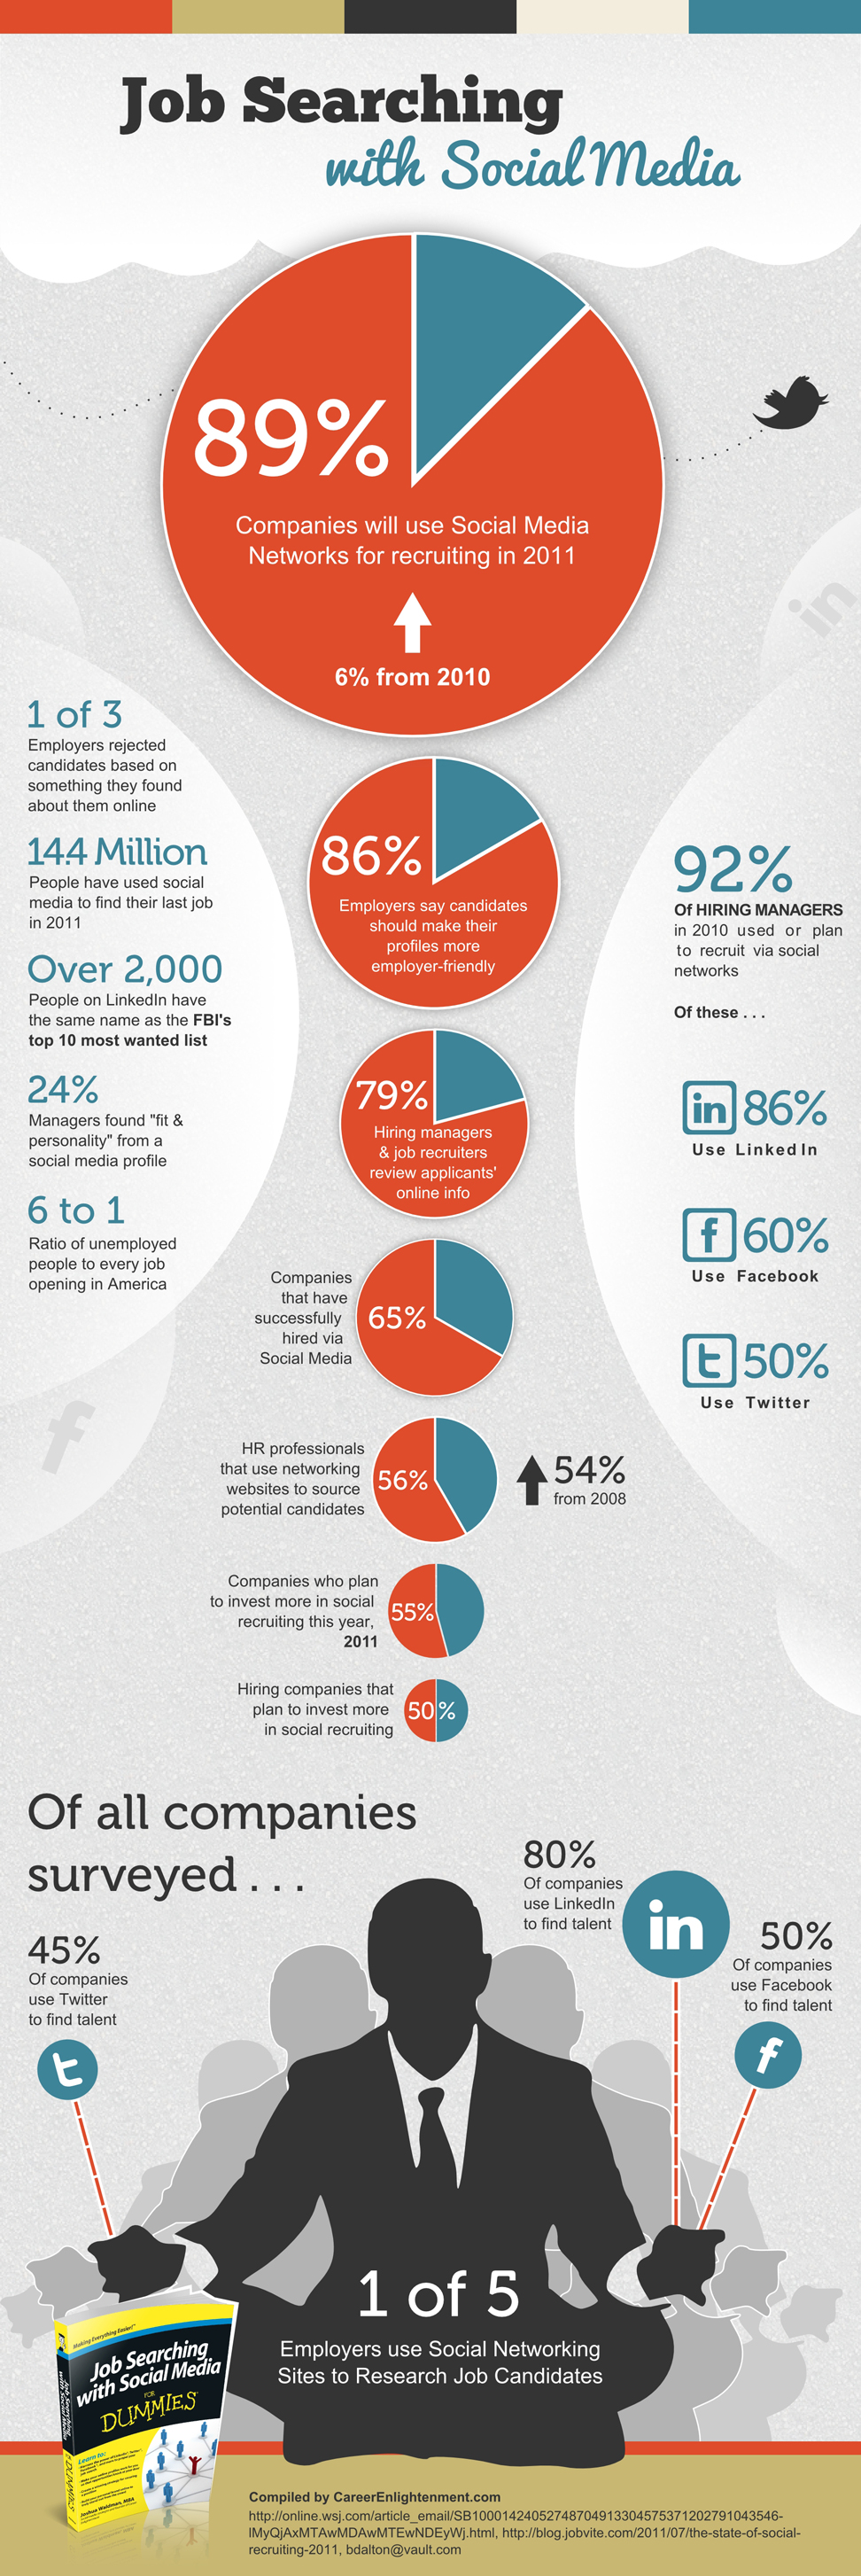 Job-Searching-with-Social-Media-Infographic